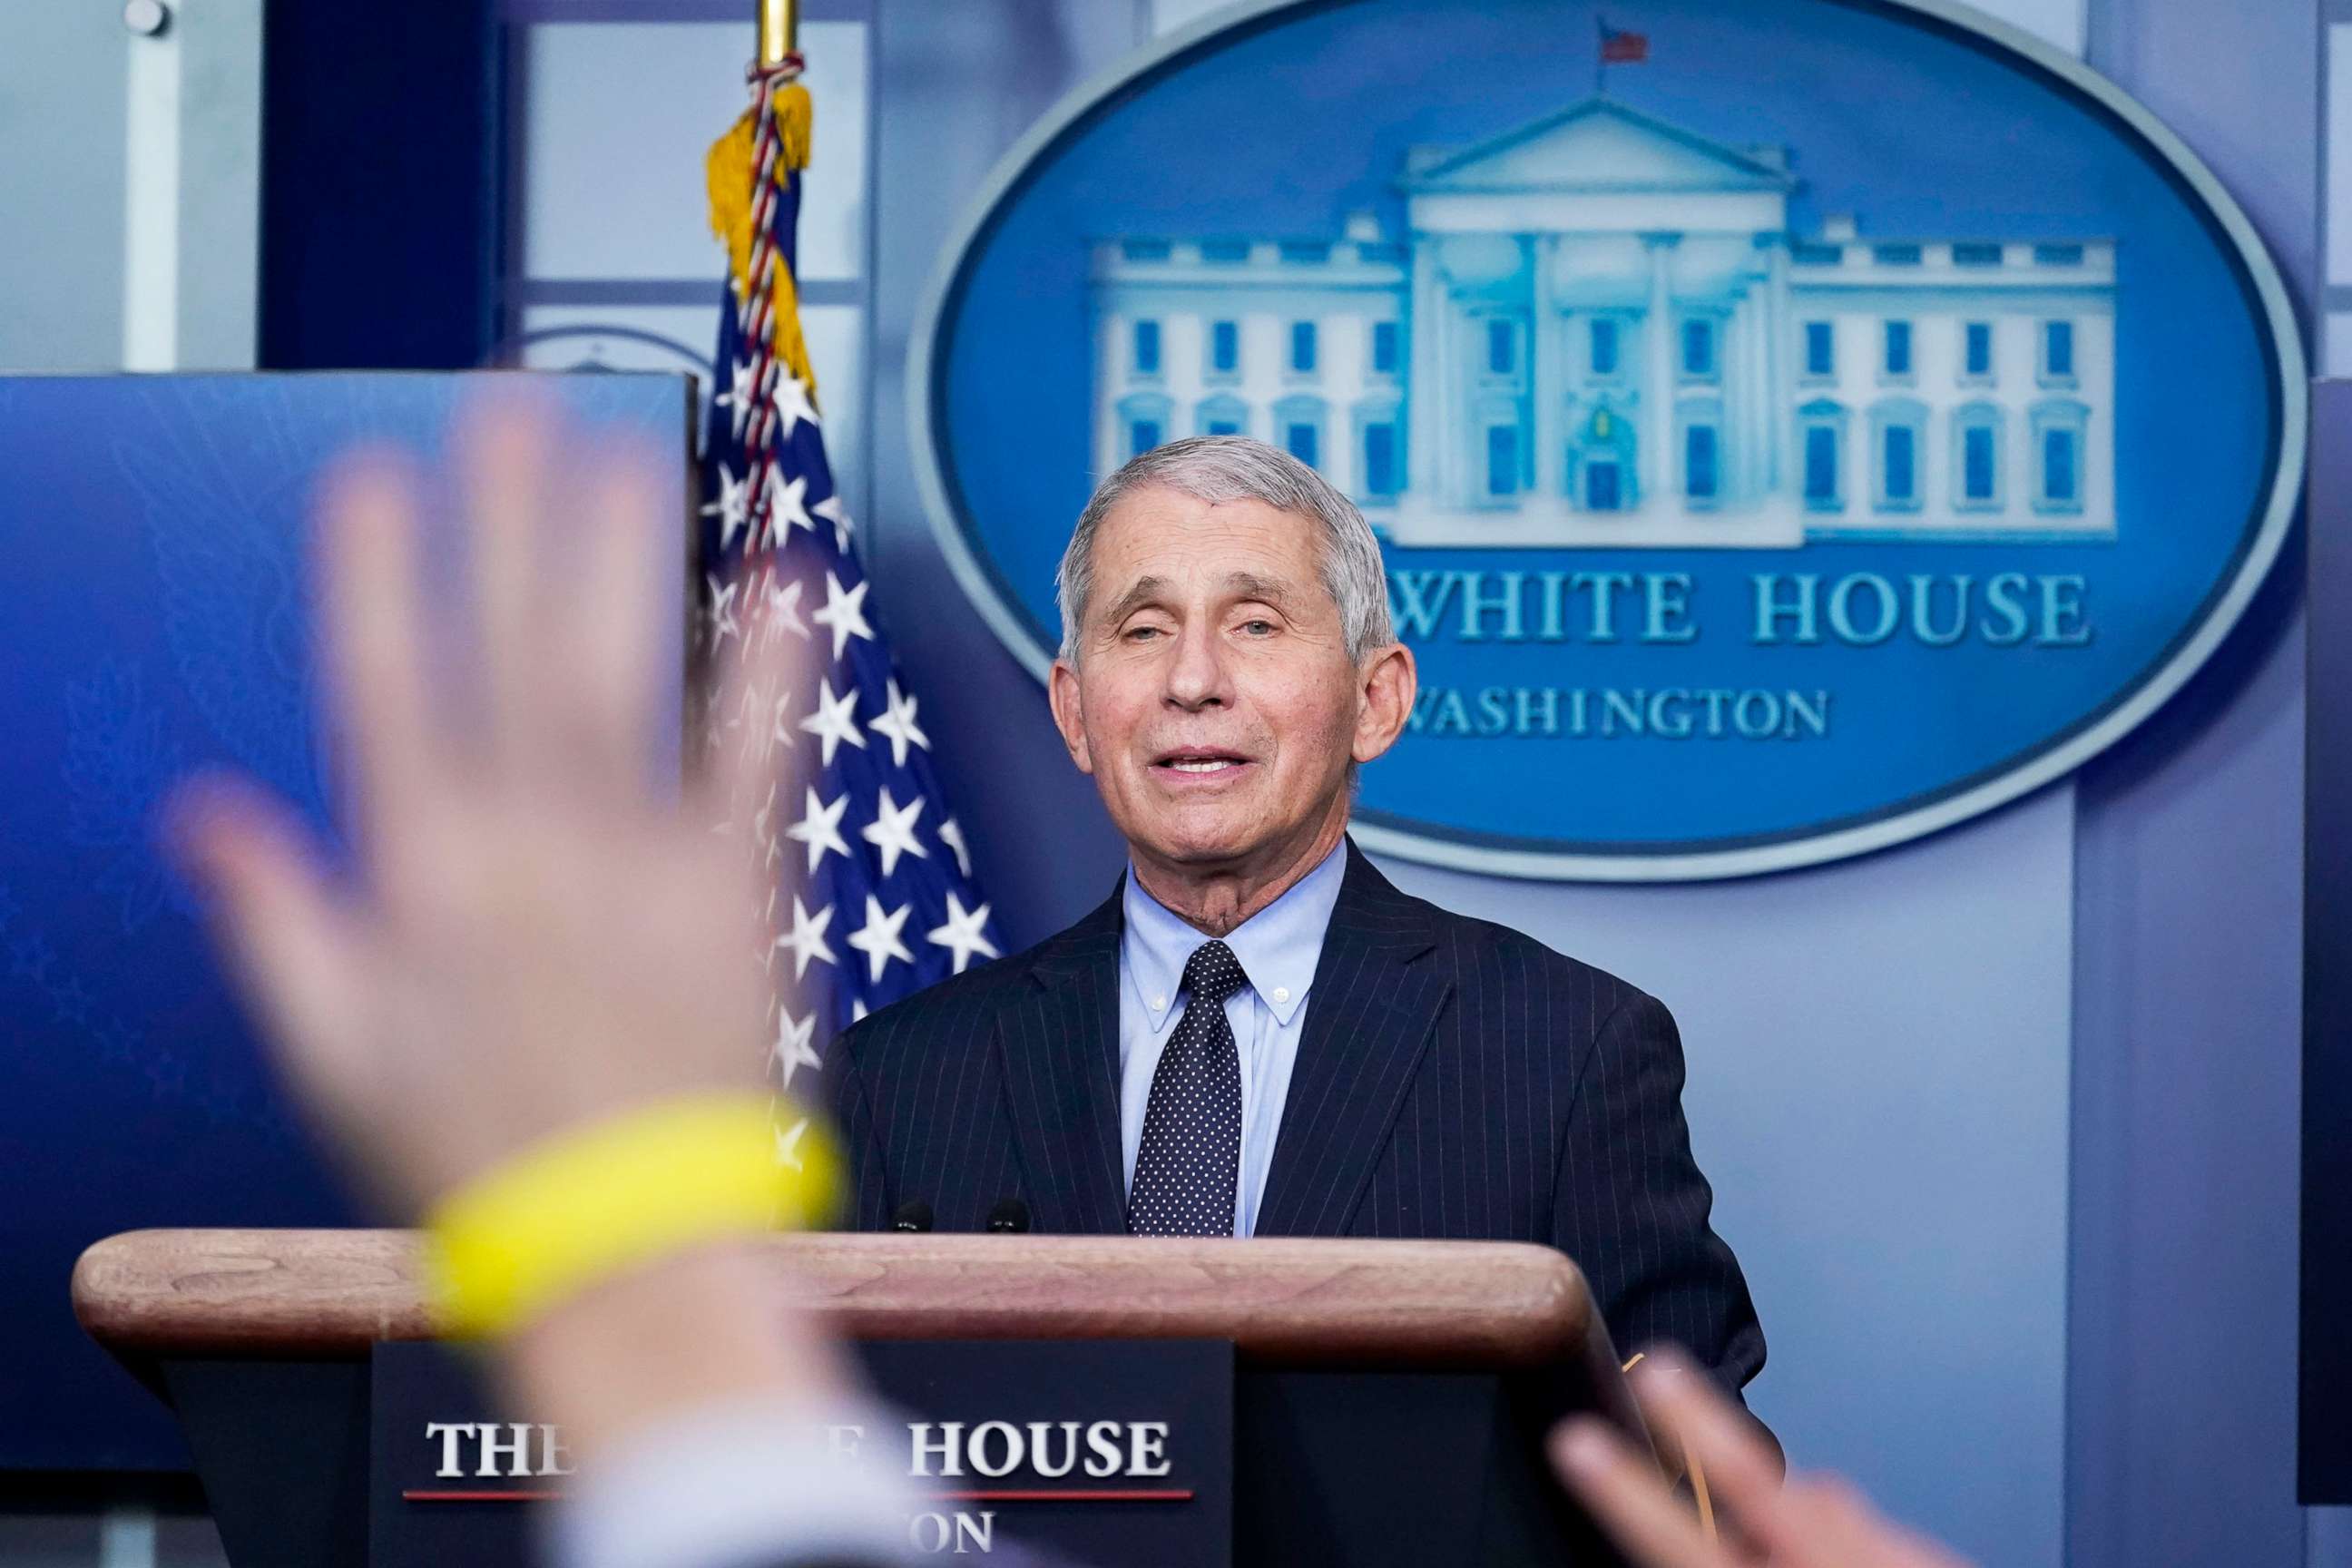 PHOTO:Dr. Anthony Fauci, director of the National Institute of Allergy and Infectious Diseases, takes questions as he speaks with reporters in the James Brady Press Briefing Room at the White House, Jan. 21, 2021.